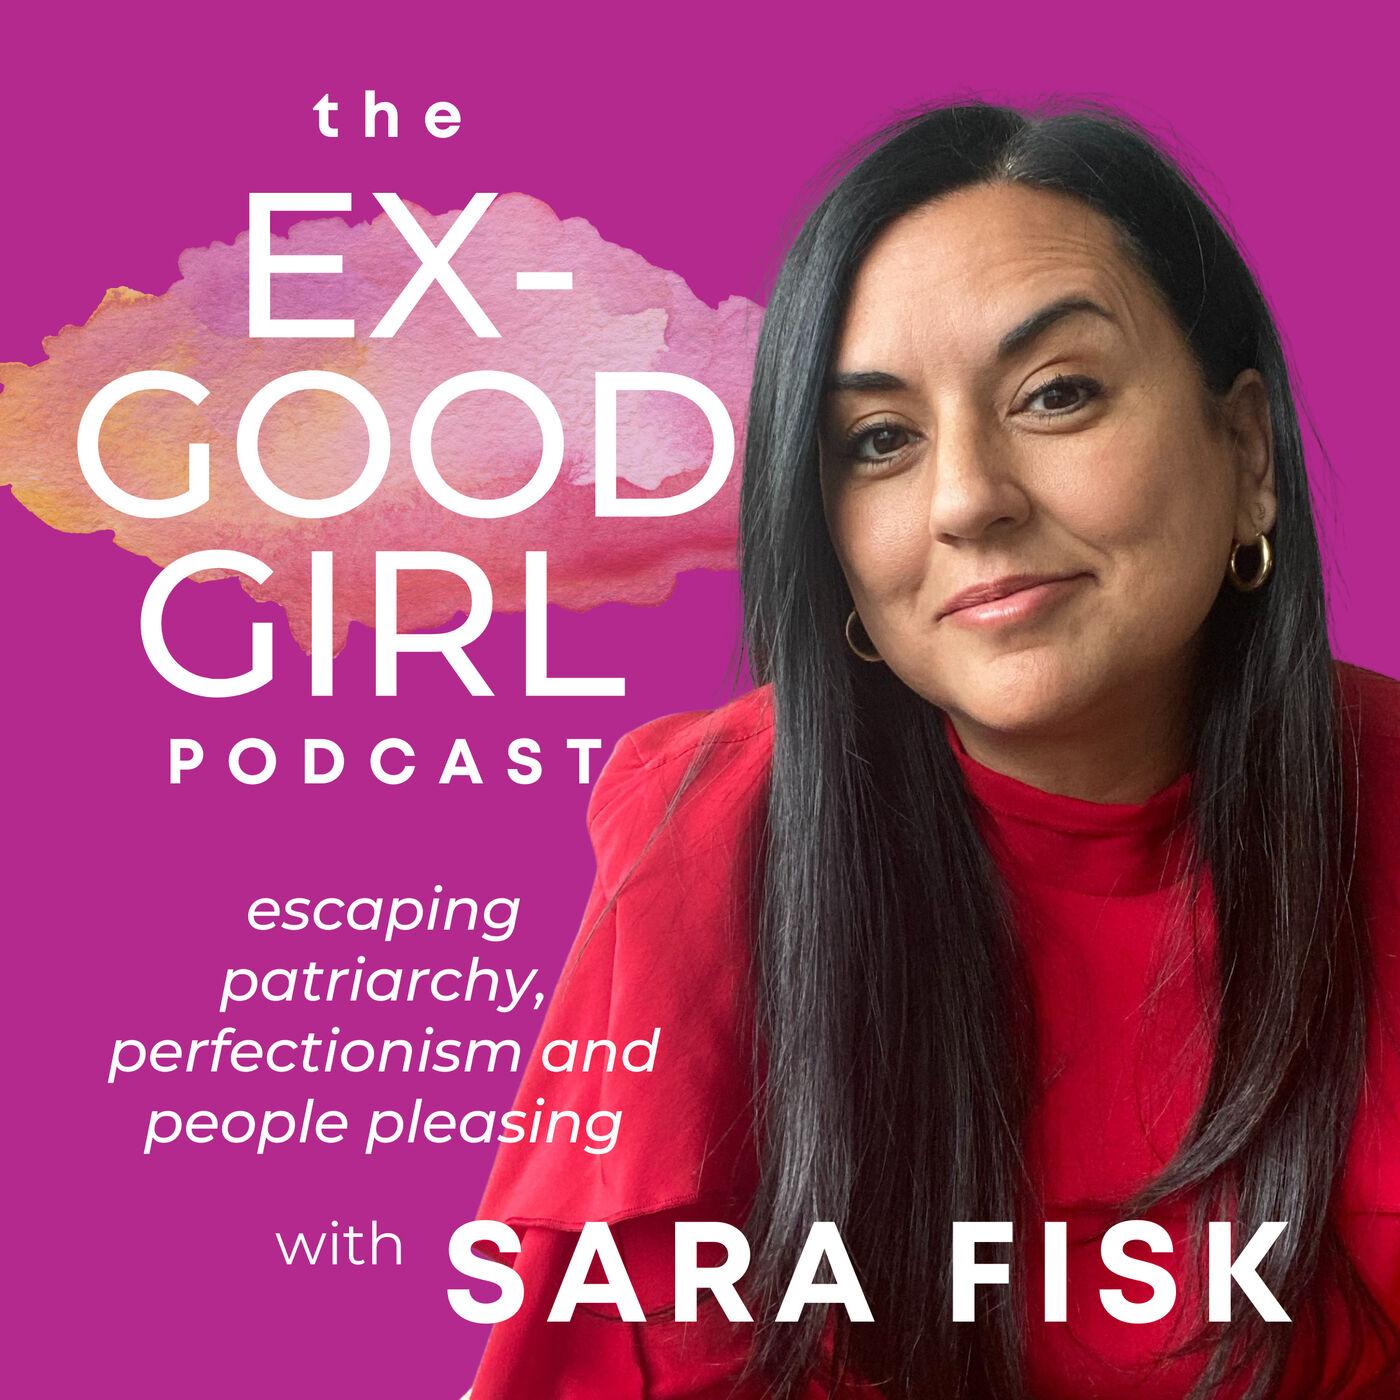 The ex-good girl podcast with sara fisk.